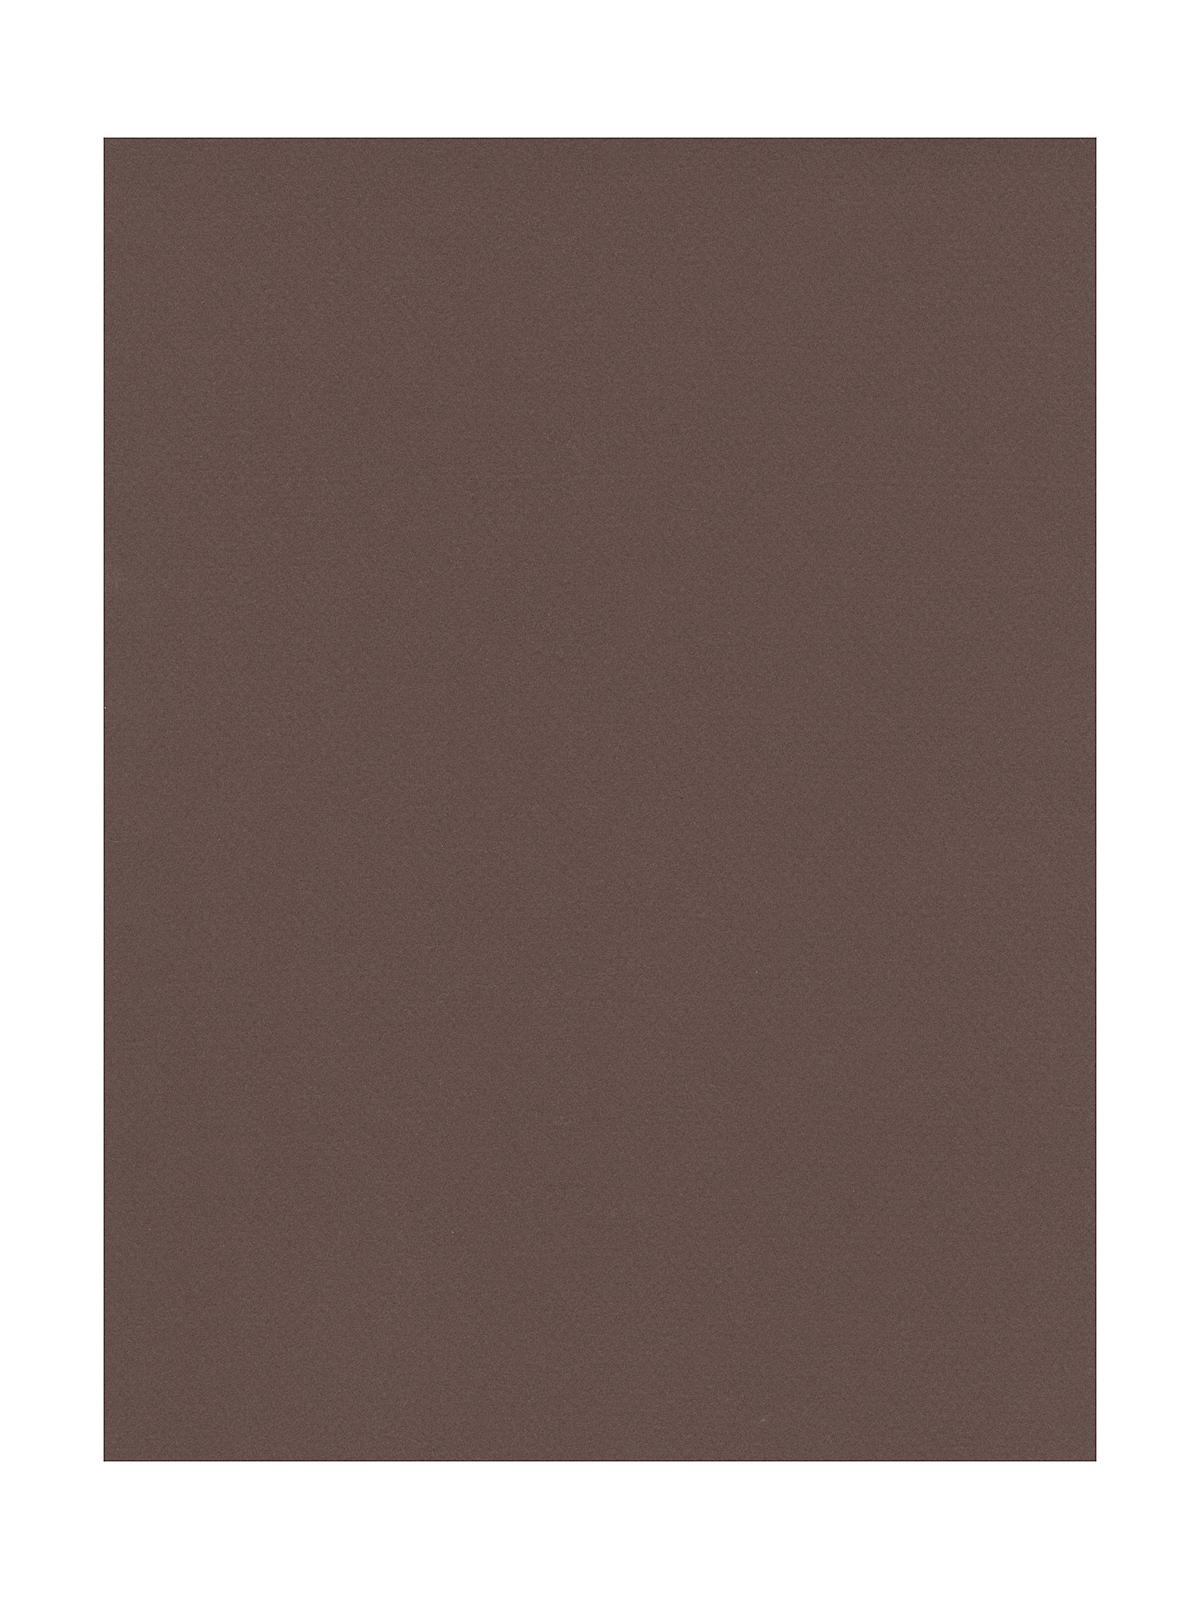 Mi-teintes Tinted Paper Sepia 19 In. X 25 In.